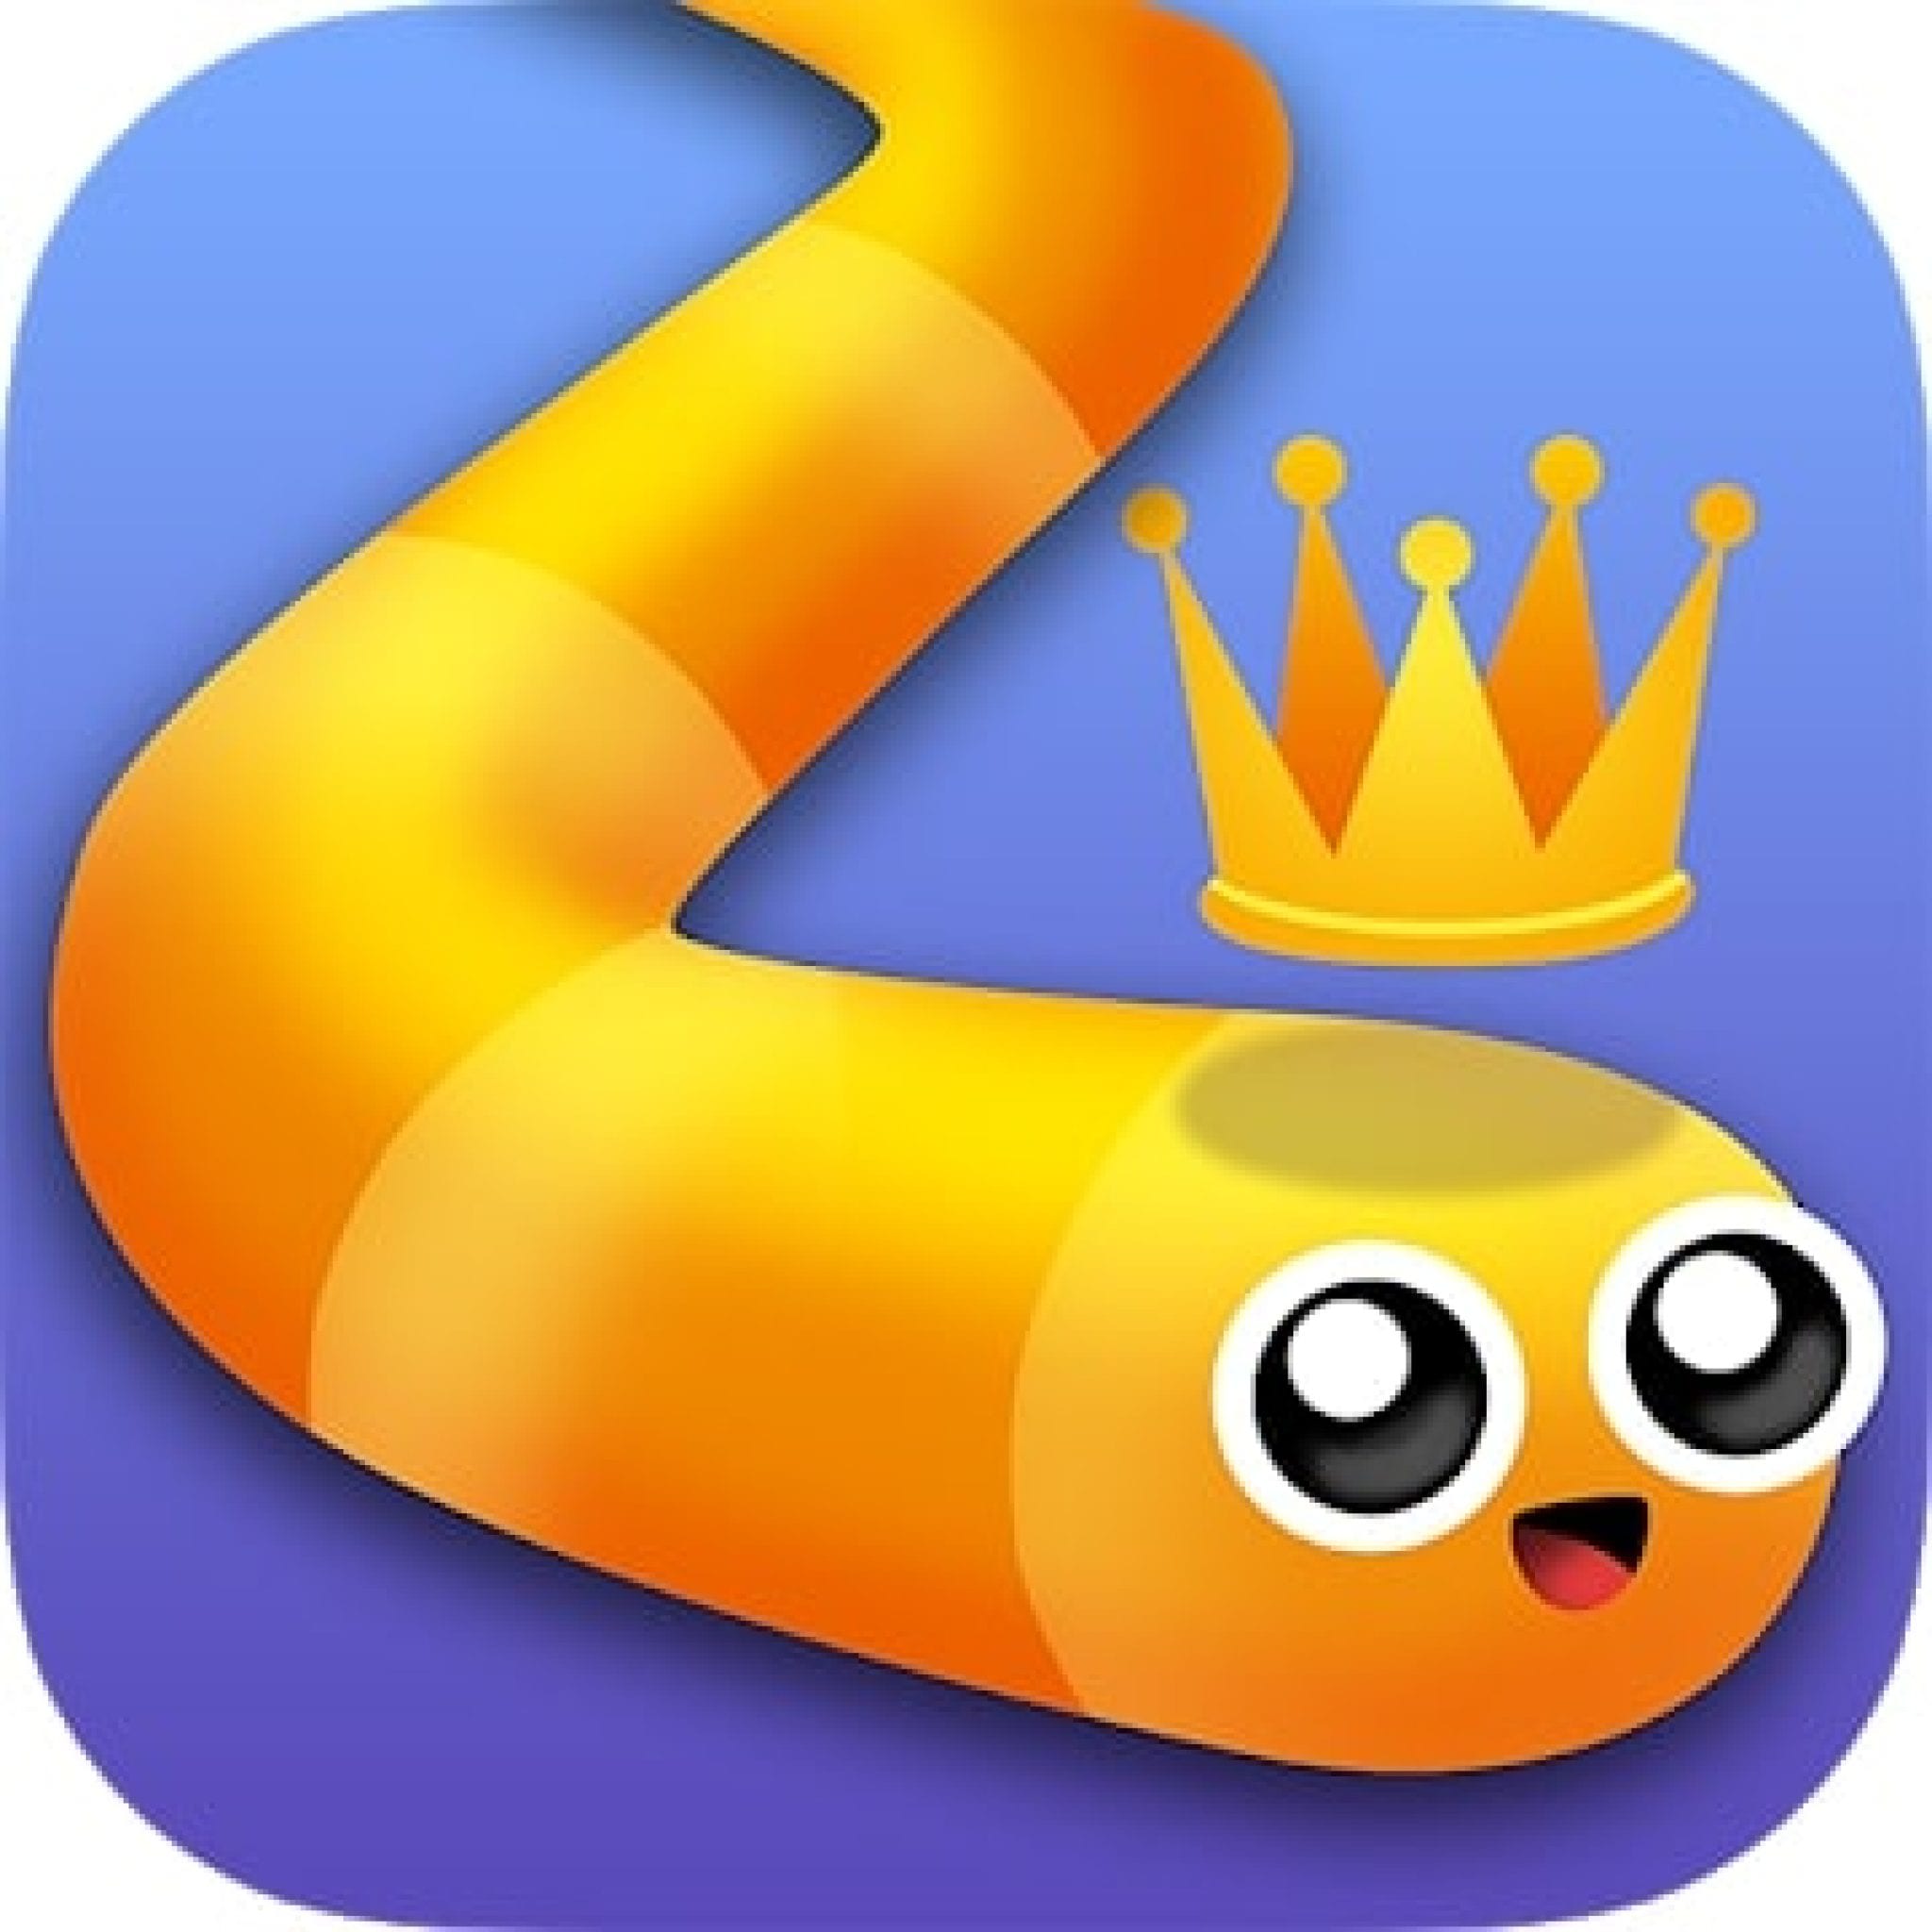 Snake.io game review | Freeappsforme - Free apps for Android and iOS